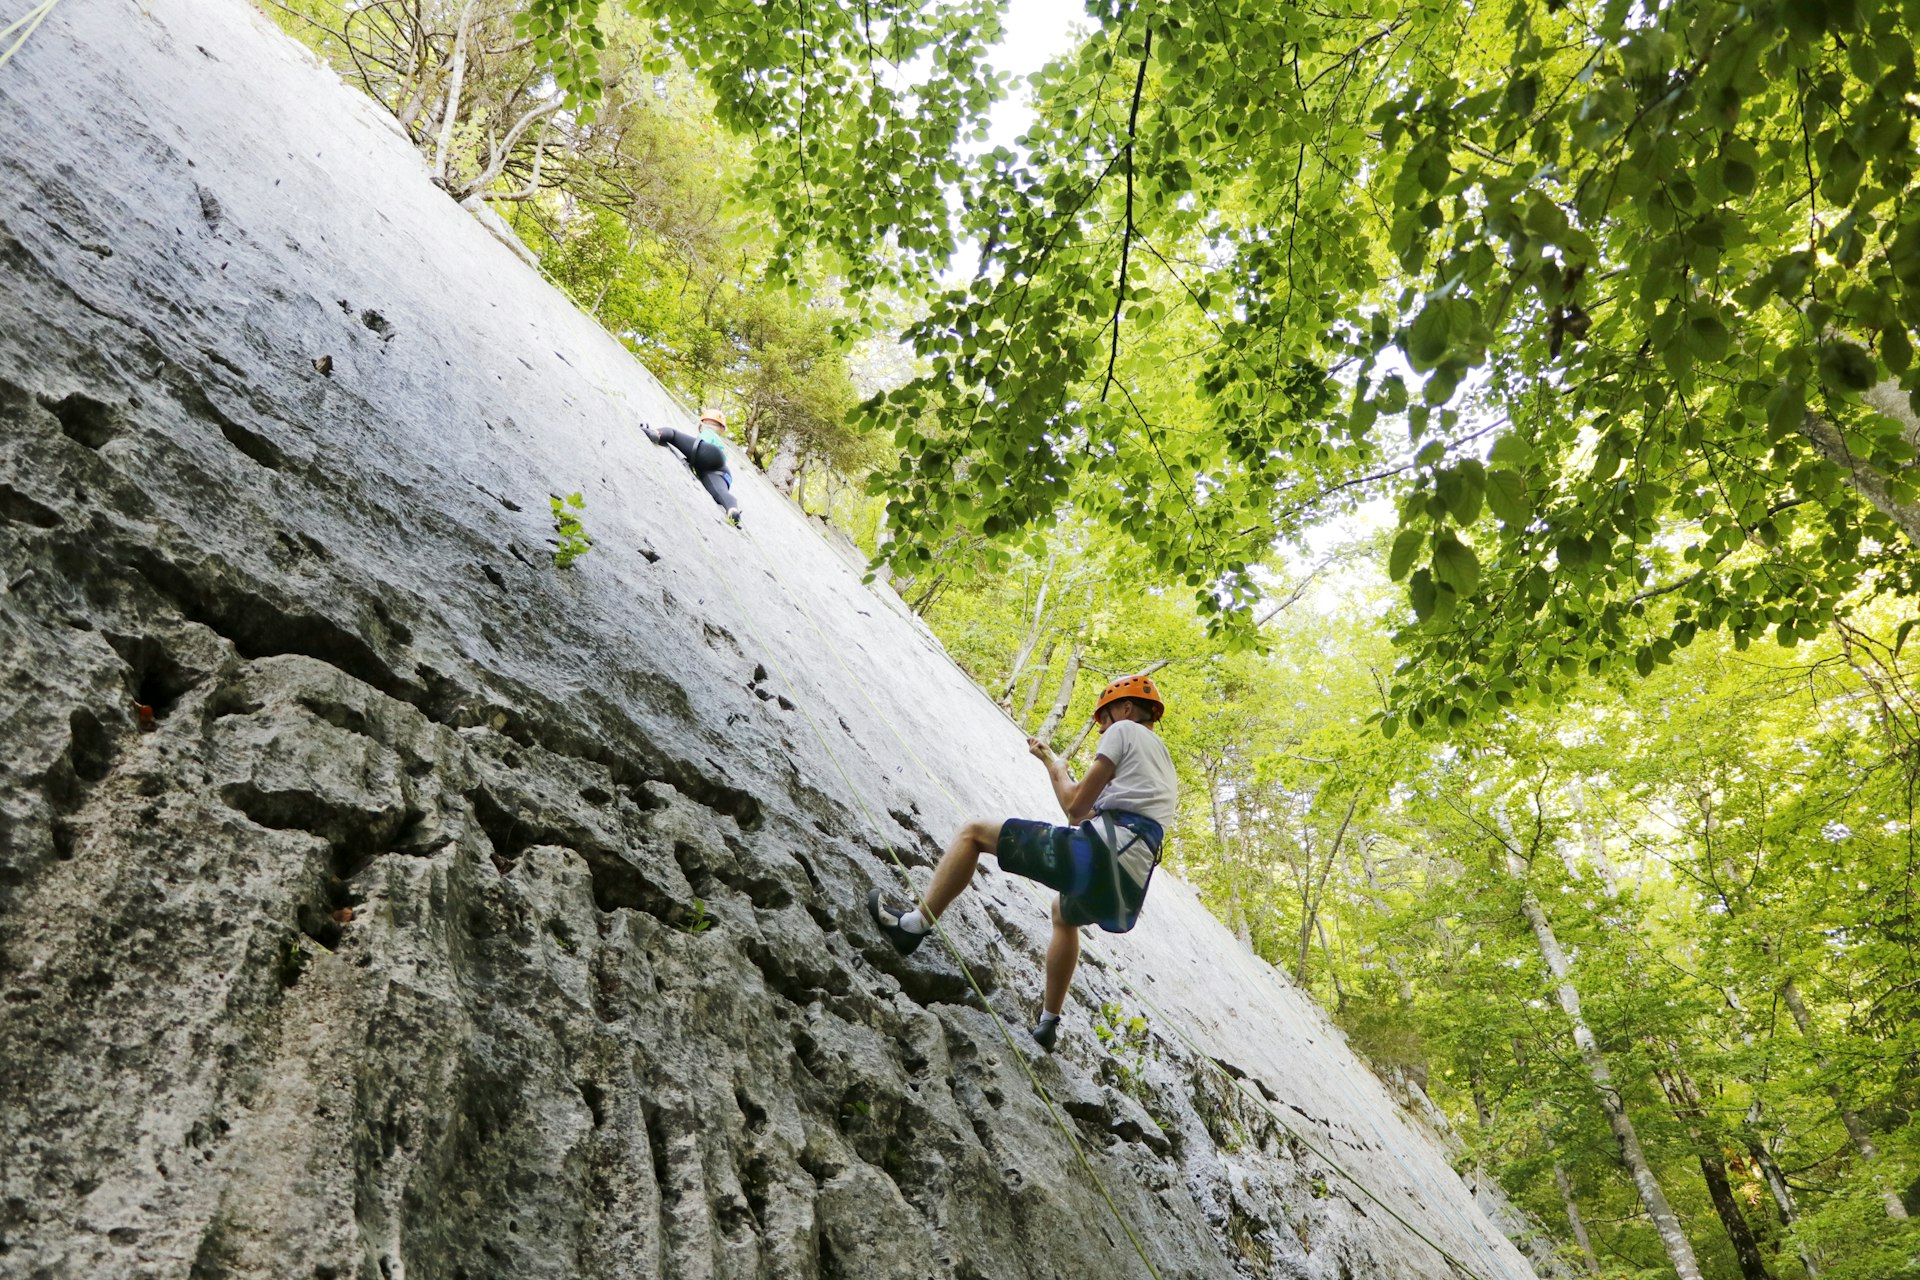 Teenagers rock climbing in the Jura mountains, seen from below as they rappel up a rock face